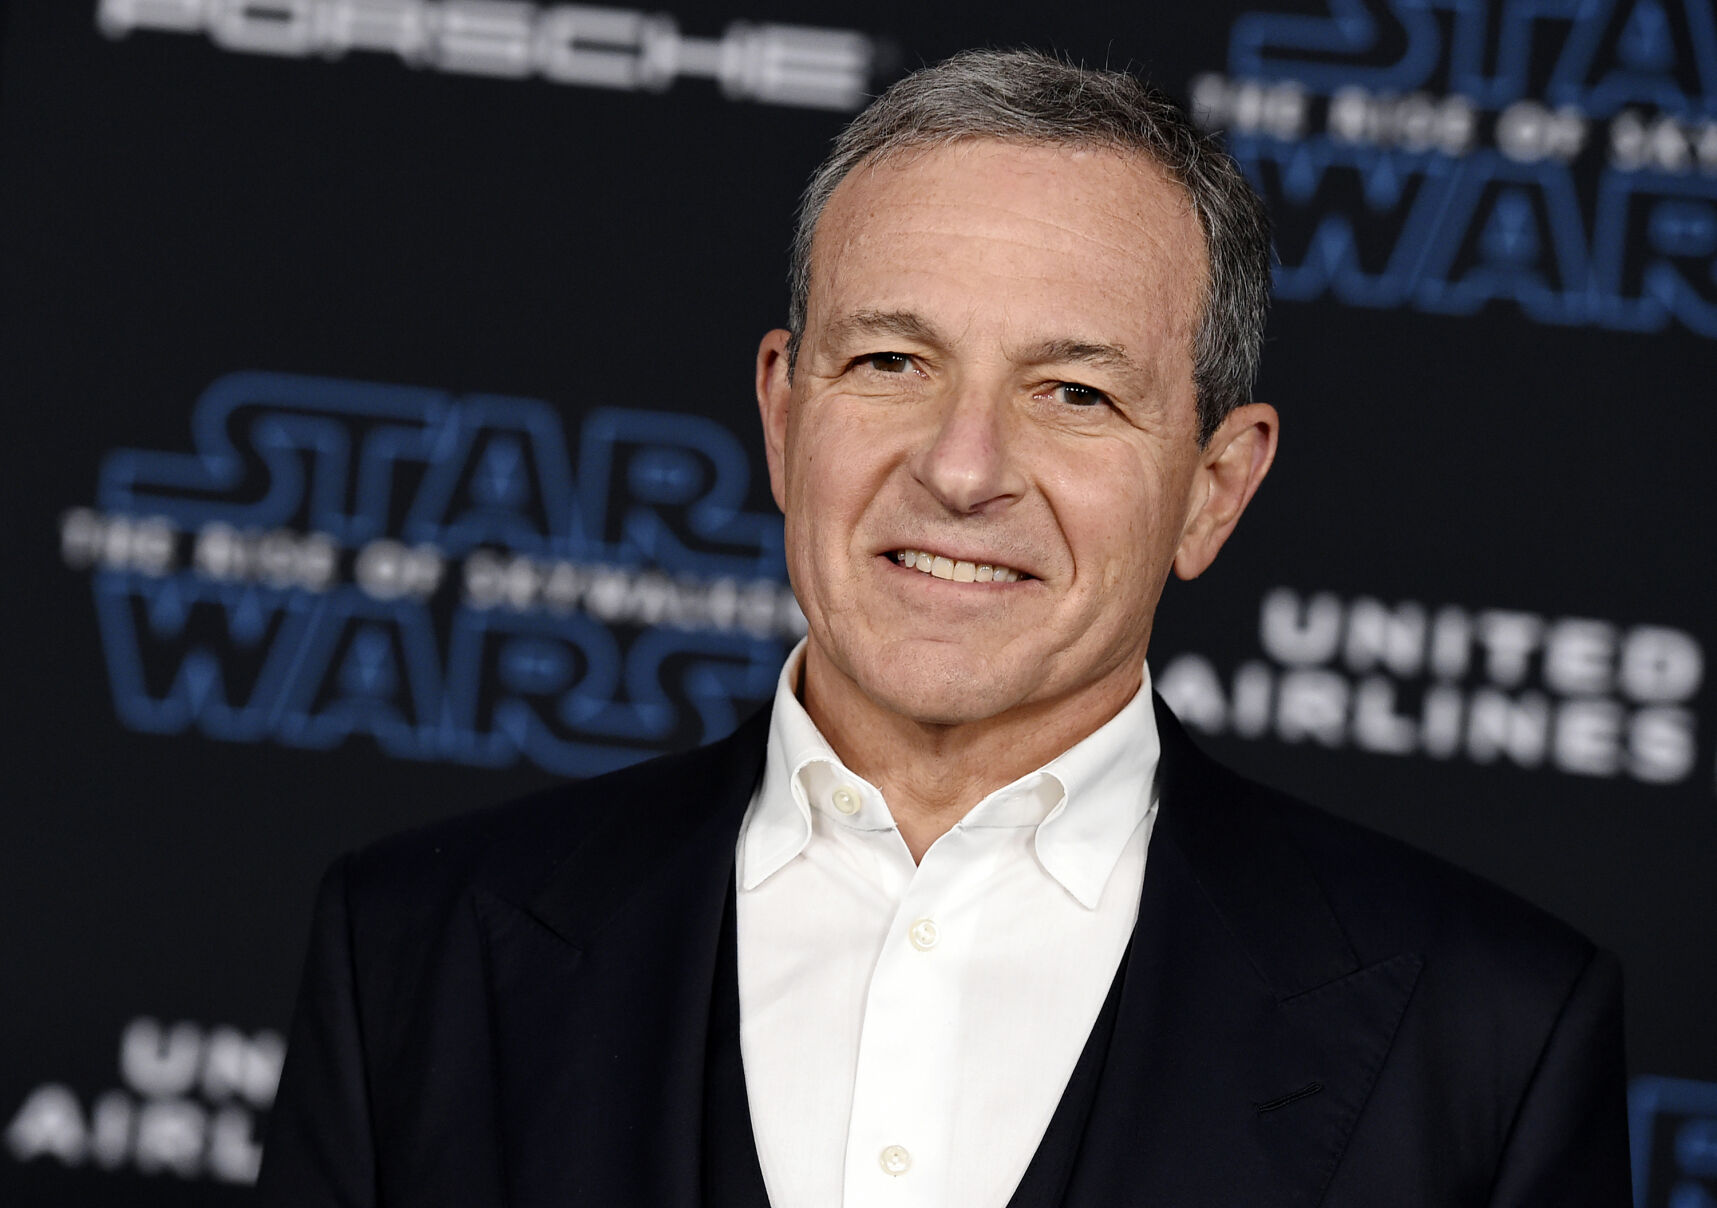 <p>FILE - Robert Iger arrives at the world premiere of "Star Wars: The Rise of Skywalker," in Los Angeles, on Dec. 16, 2019. The Walt Disney Company announced late Sunday, Nov. 20, 2022, that former CEO Iger, would return to head the company for two years in a surprise move. The statement said Bob Chapek, who succeeded Iger in 2020, had stepped down from the position. (Jordan Strauss/Invision/AP, FIle)</p>   PHOTO CREDIT: Jordan Strauss - invision linkable, Invision